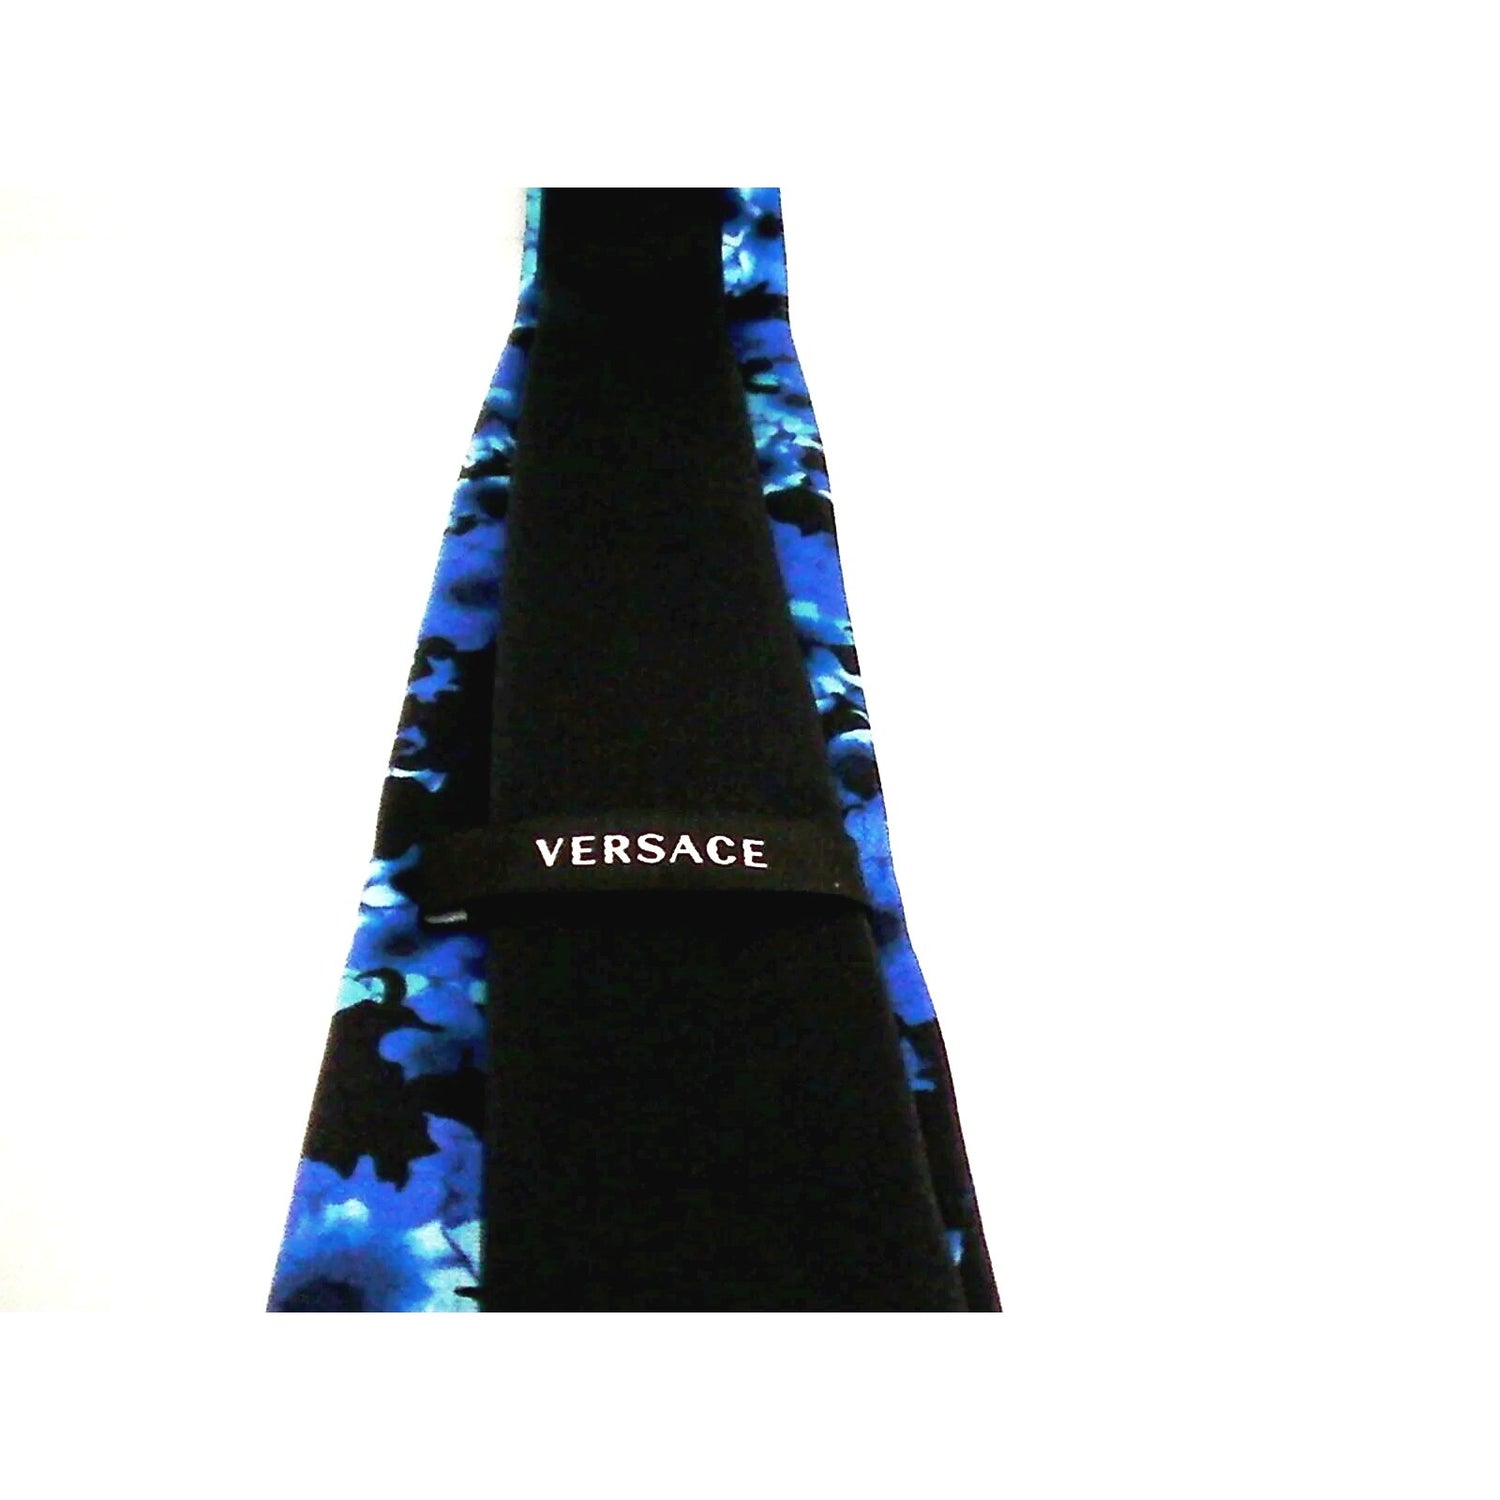 VERSACE TIES MEDUSA / Men's 100% multi color Floral made in Italy - Classic Fashion DealsVERSACE TIES MEDUSA / Men's 100% multi color Floral made in ItalyVersaceClassic Fashion DealsVERSACE TIES MEDUSA / Men's 100% multi color Floral made in Italy